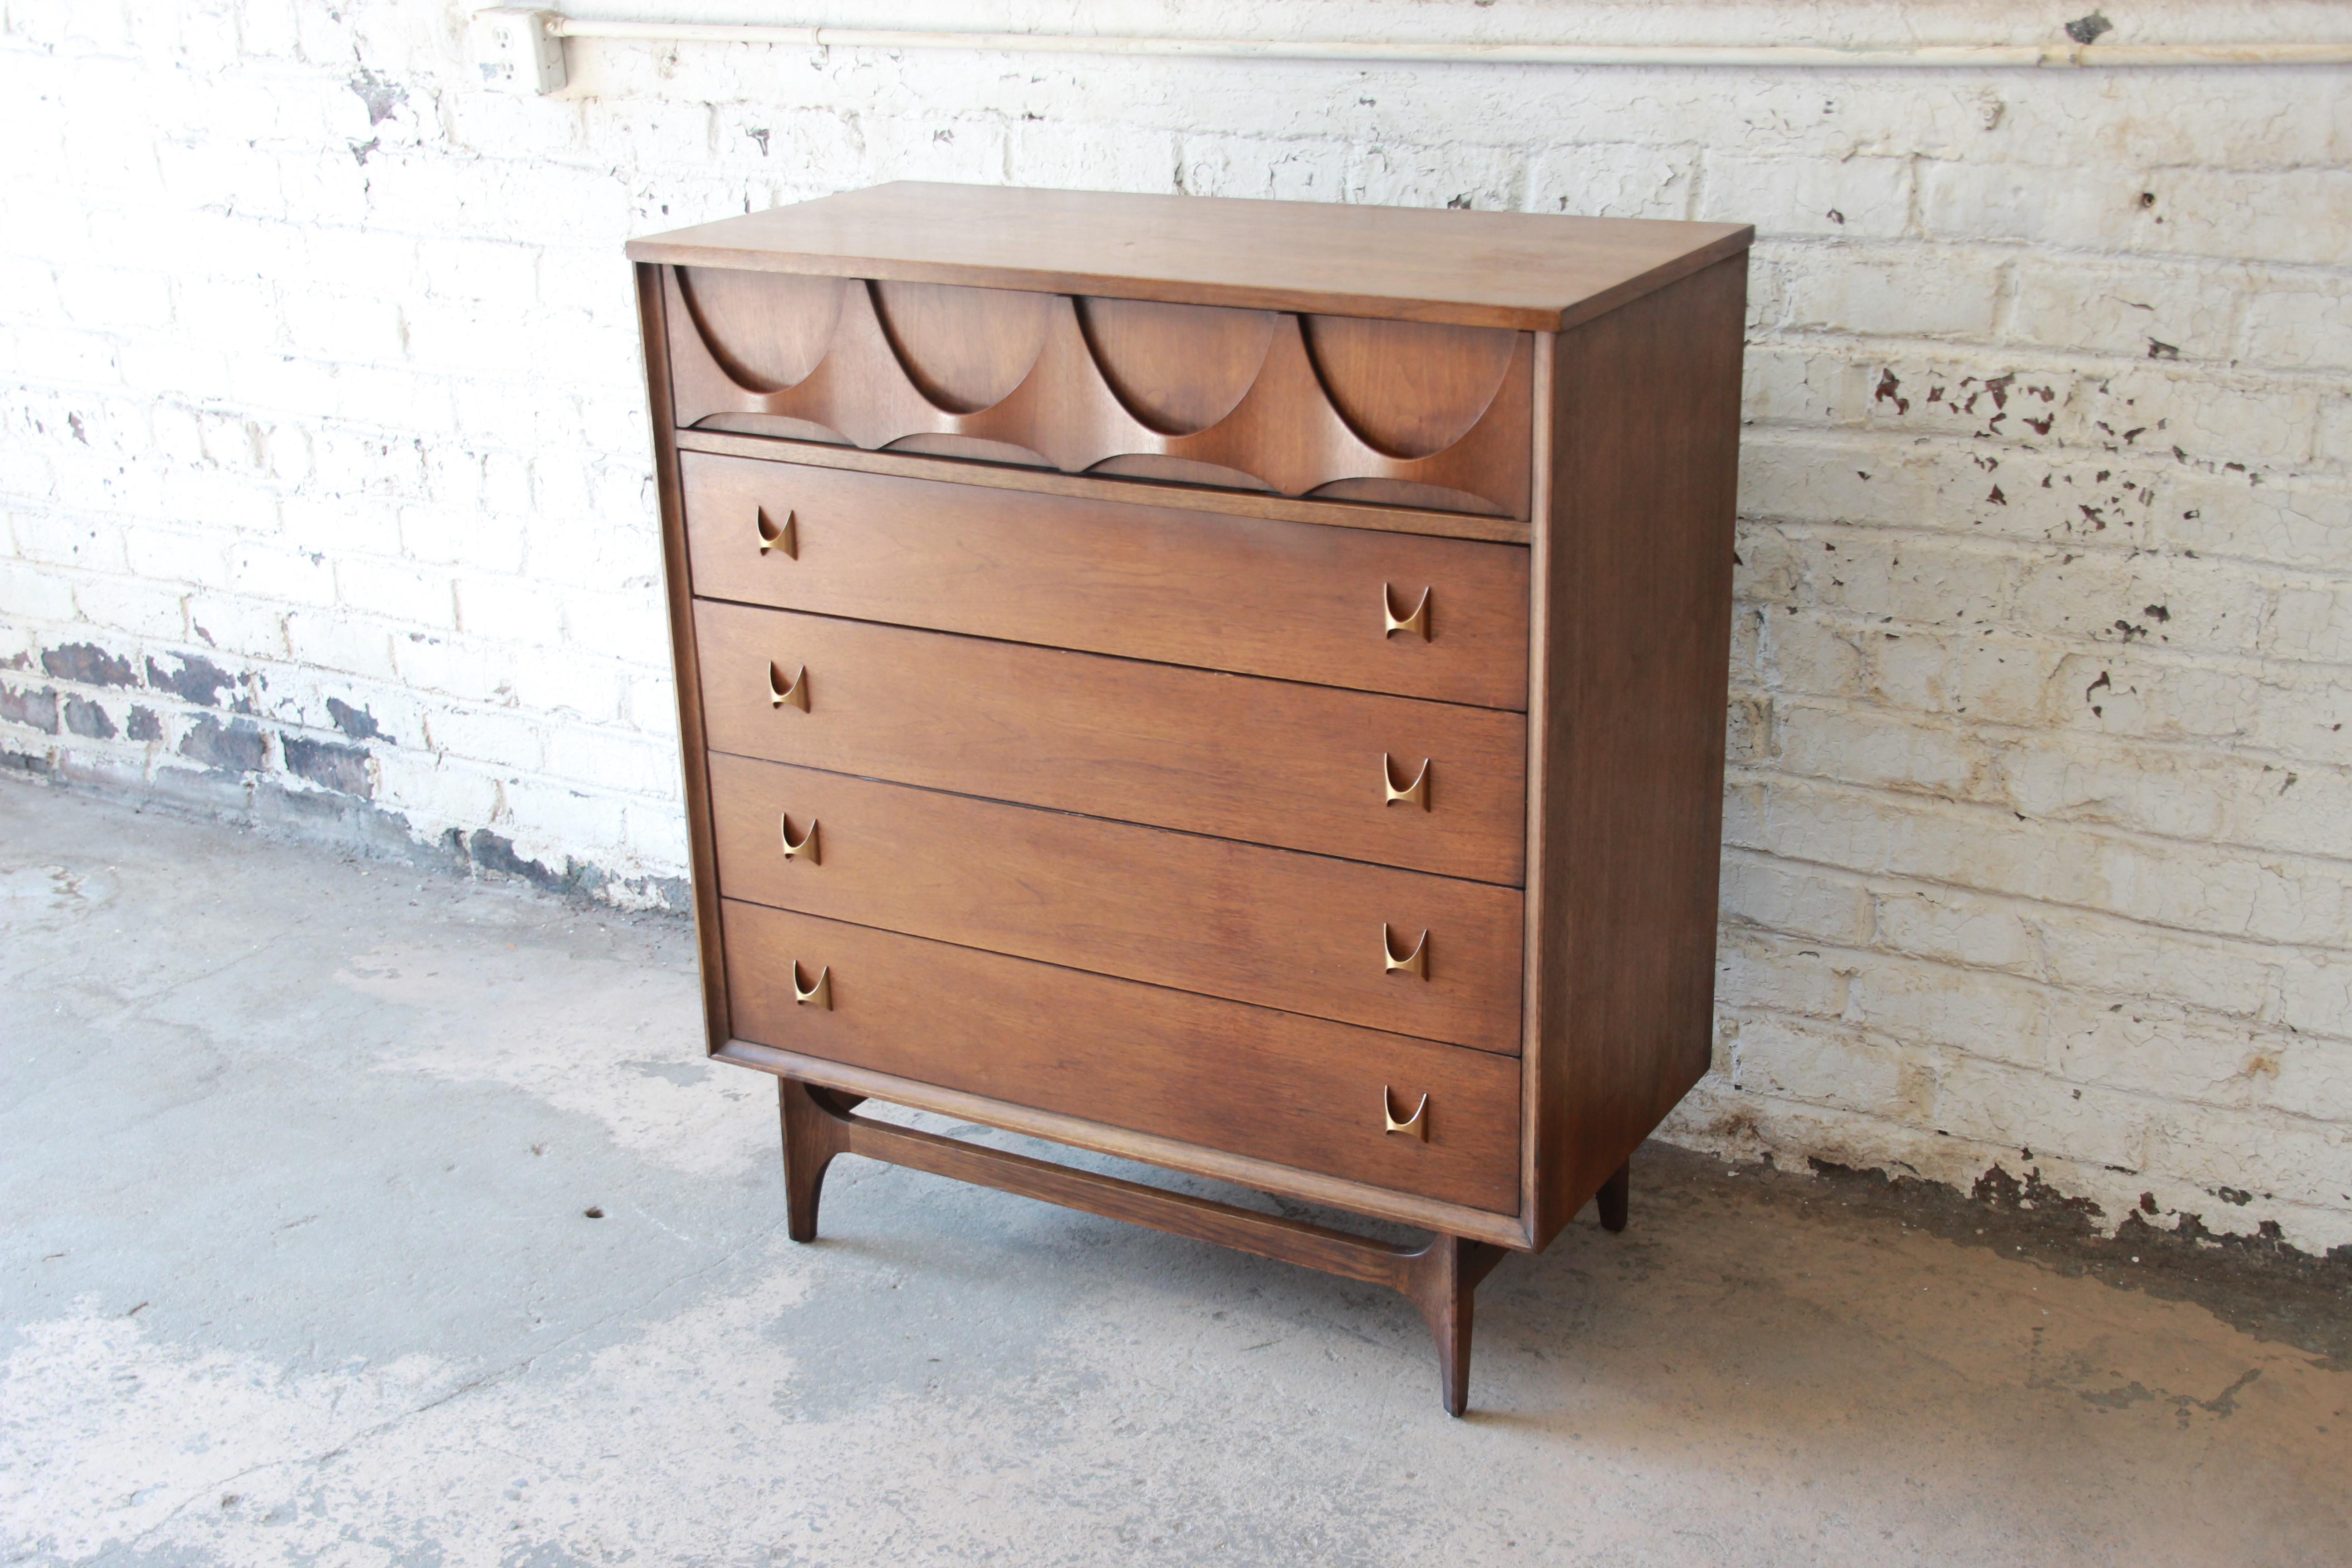 An iconic Broyhill Brasilia Mid-Century Modern sculpted walnut five-drawer highboy dresser. The dresser features gorgeous walnut wood grain, with sculpted arches and original pulls. It offers ample room for storage, with five deep dovetailed